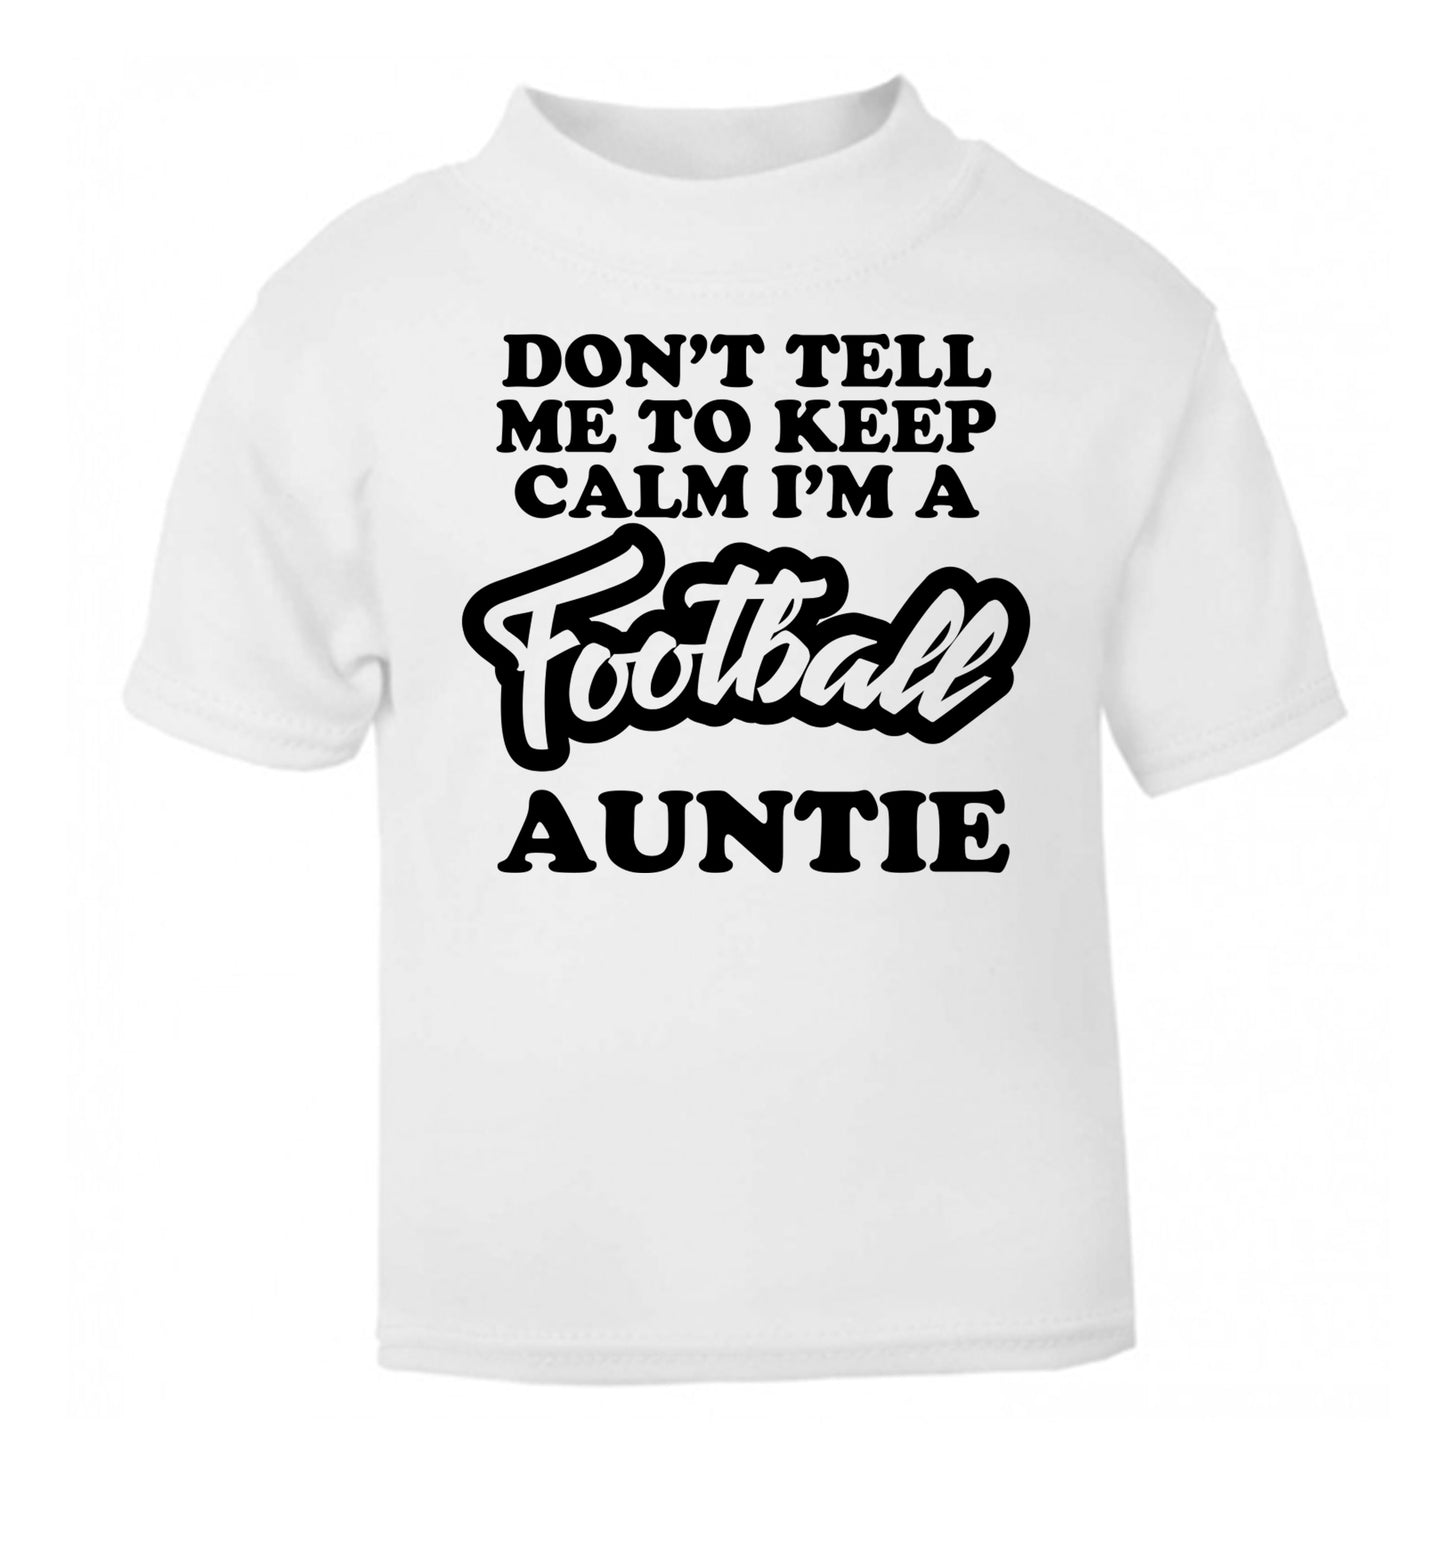 Don't tell me to keep calm I'm a football auntie white Baby Toddler Tshirt 2 Years